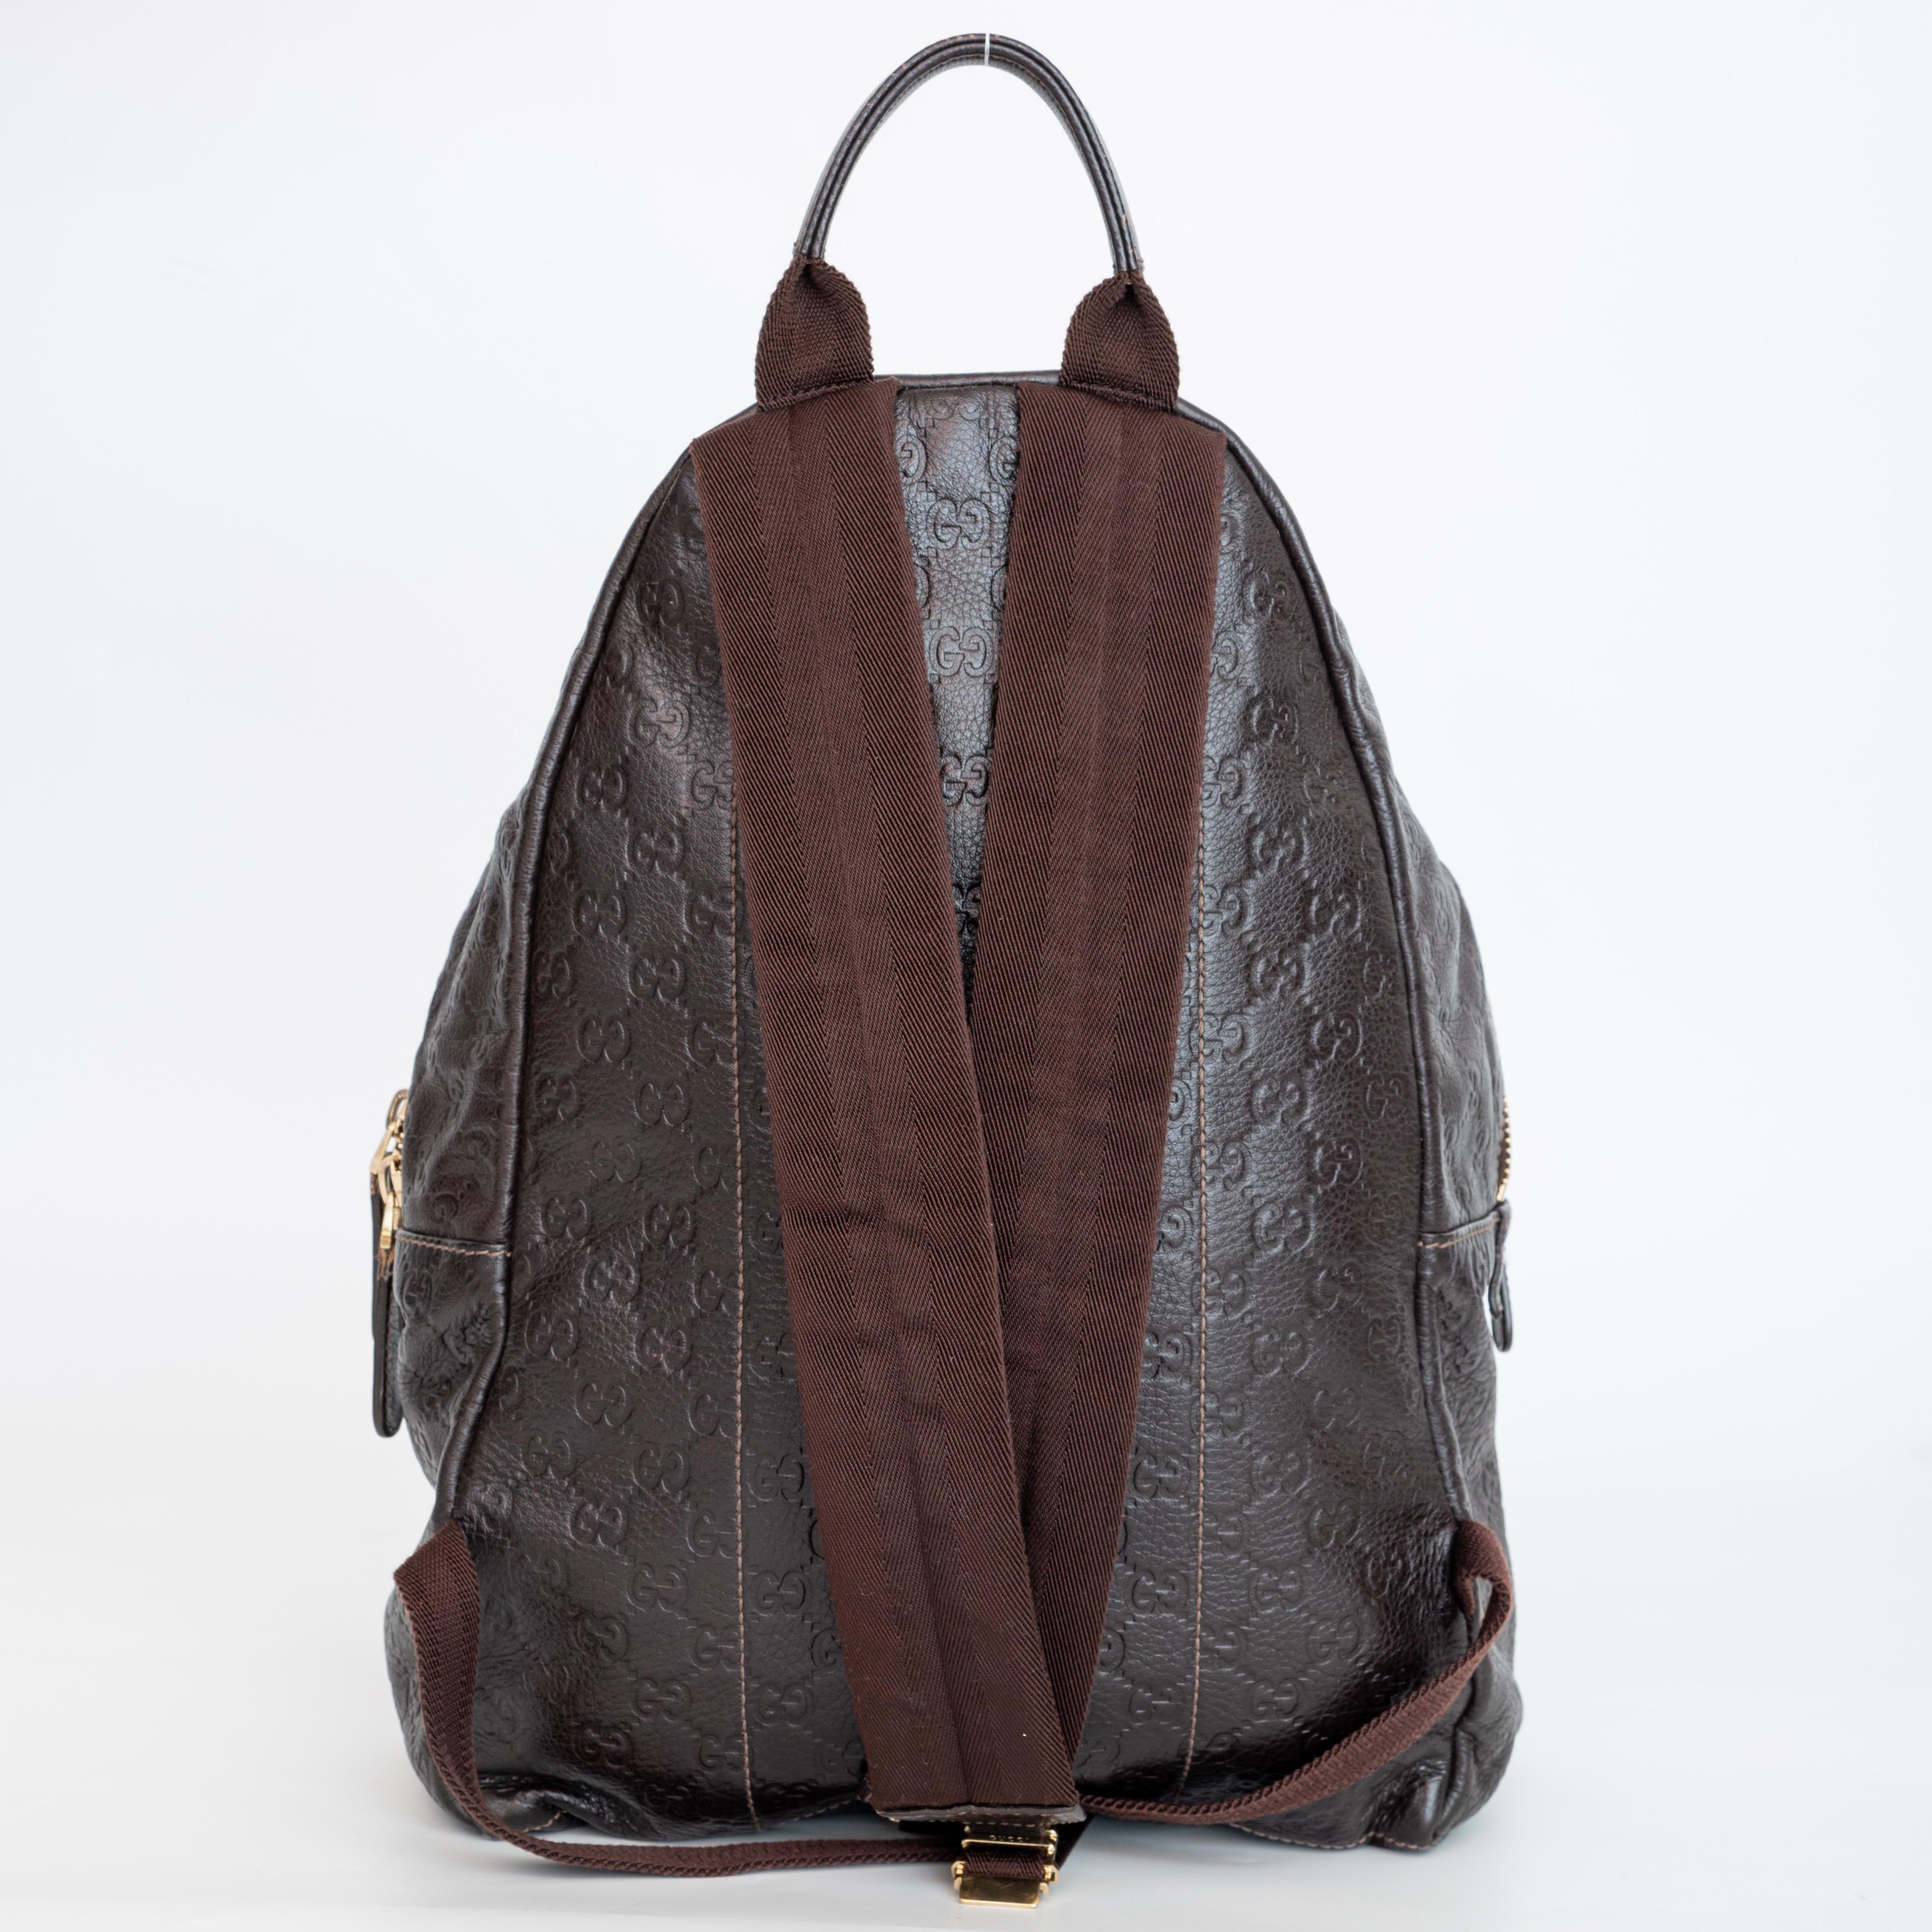 This backpack is made of Gucci Guccissima embossed leather in deep brown. The bag features adjustable padded nylon shoulder straps, a front facing zip pocket, and a primary cross-over zipper pocket. This opens to a large monogram jacquard fabric